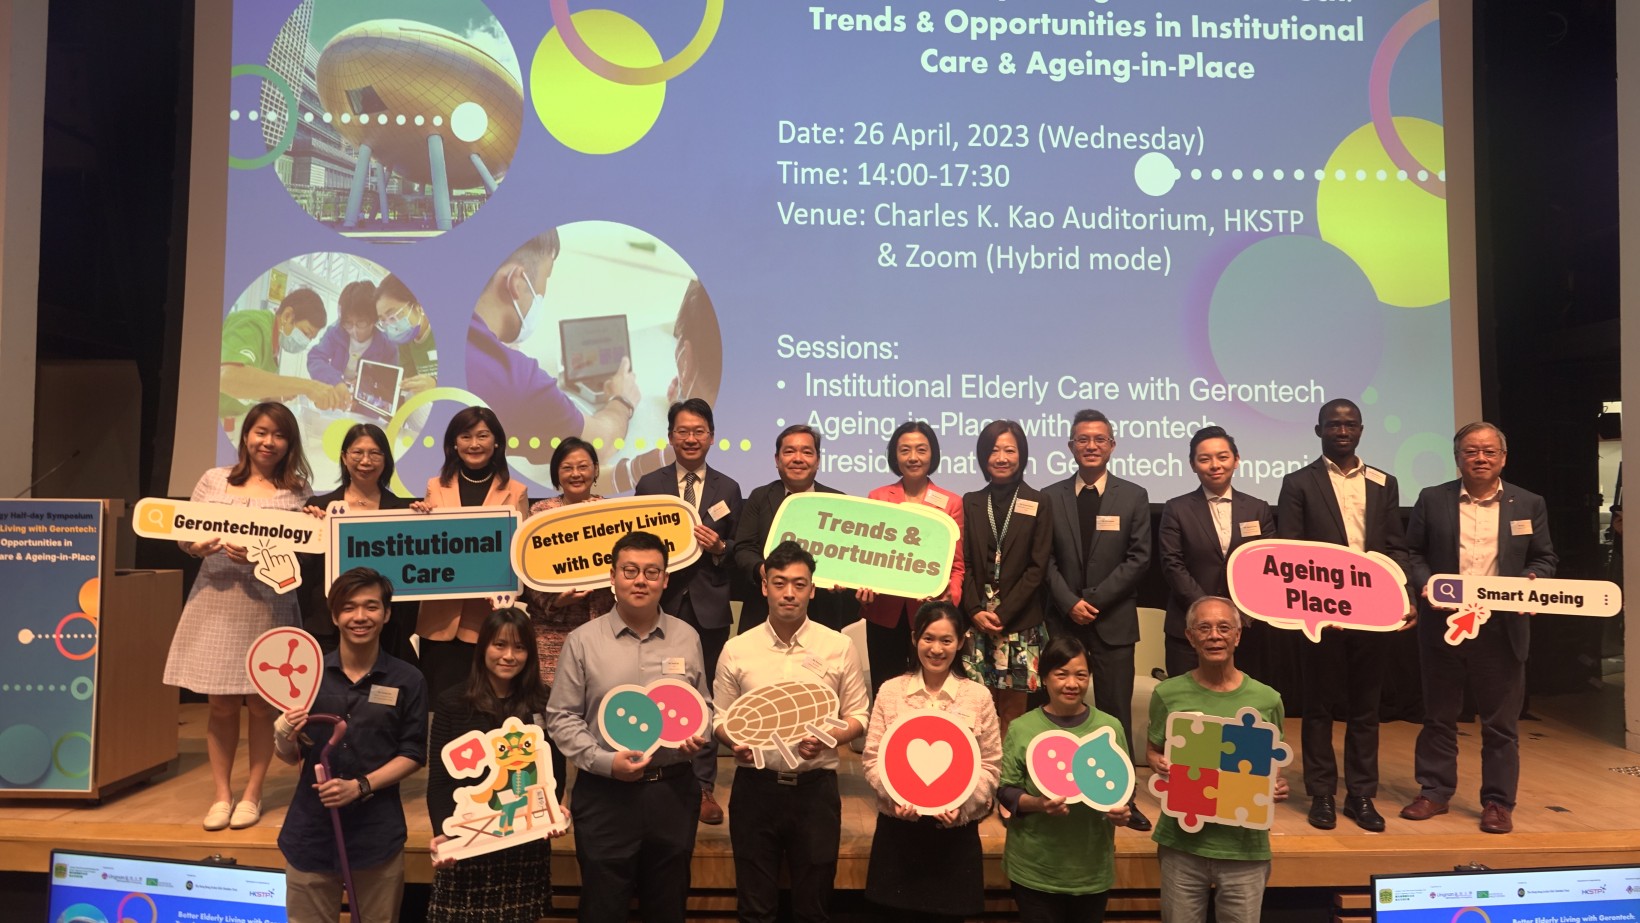 Gerontech Symposium highlighted trends and opportunities in ageing care